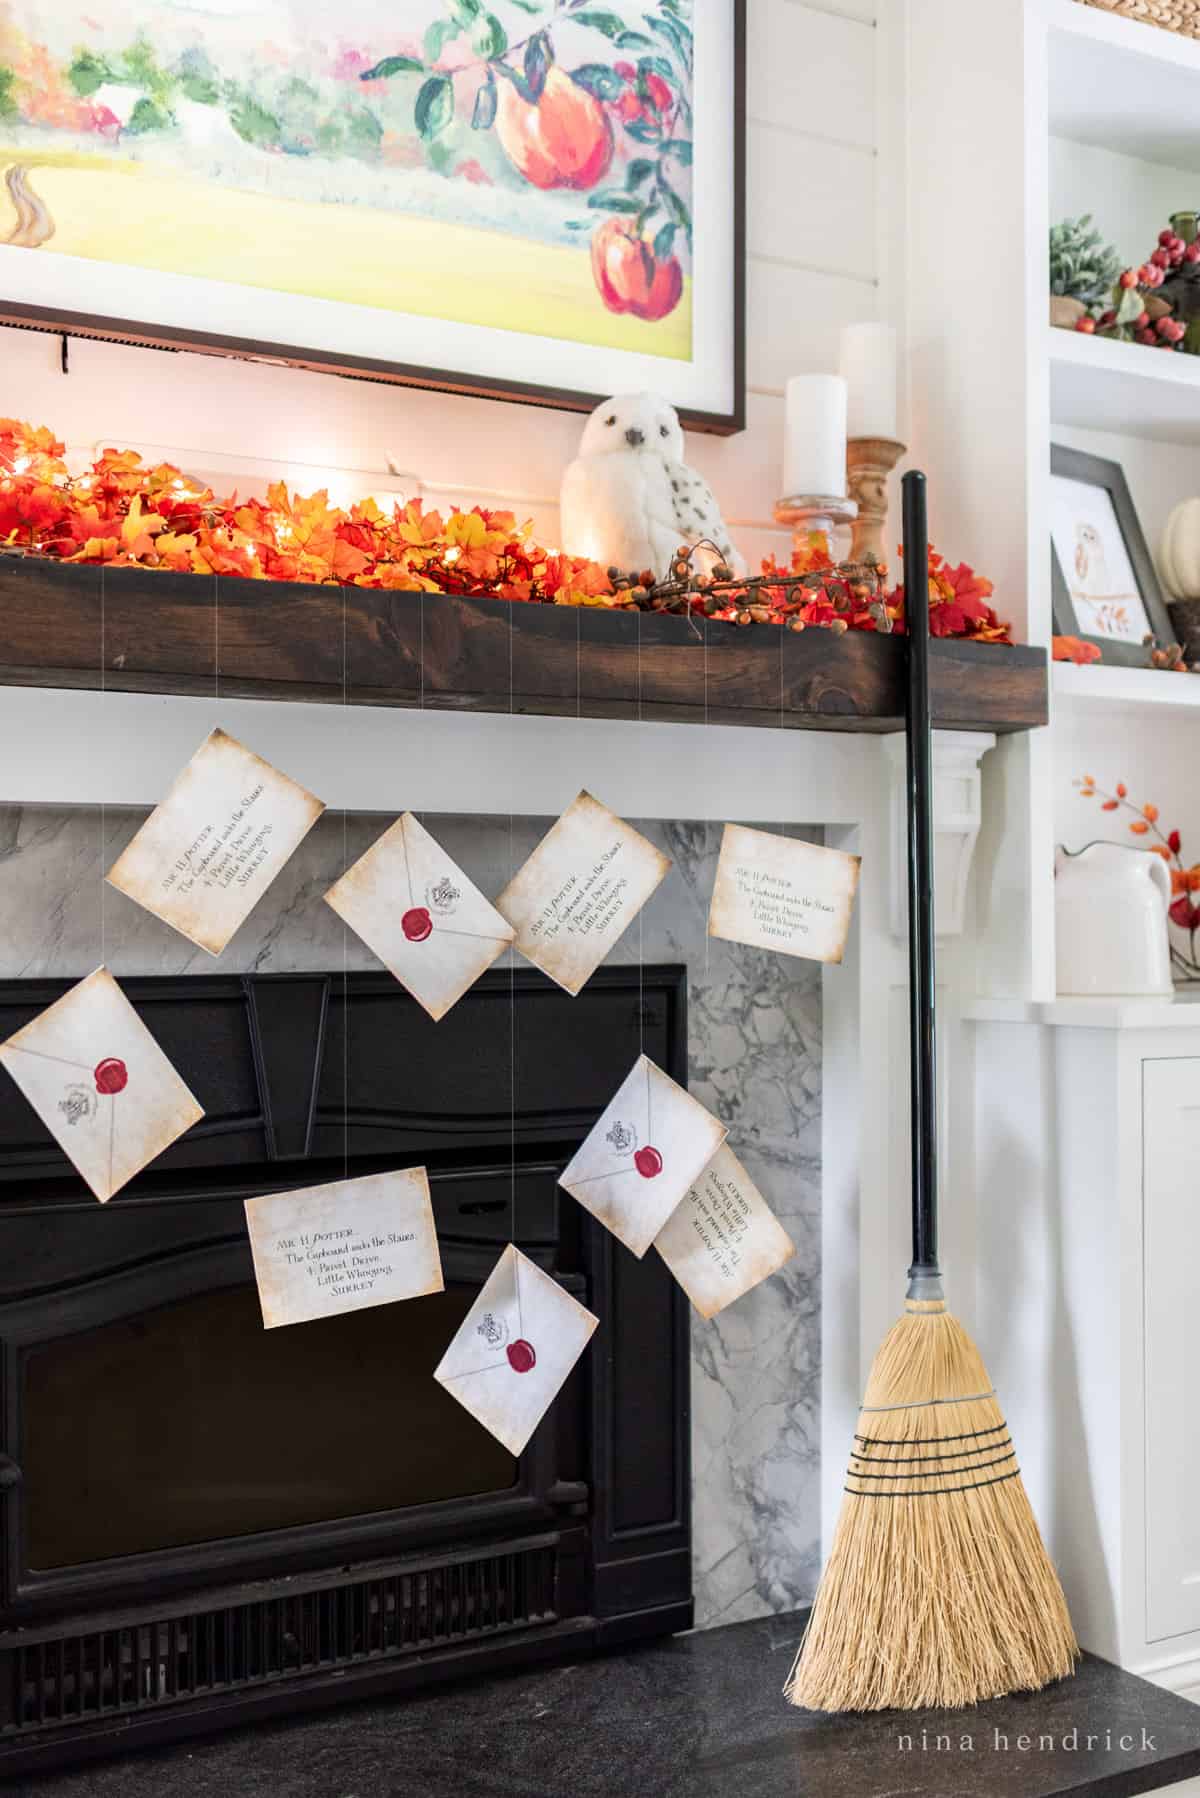 Get inspired with Halloween decorating ideas as you imagine a mantle adorned with a broom and fall cards.